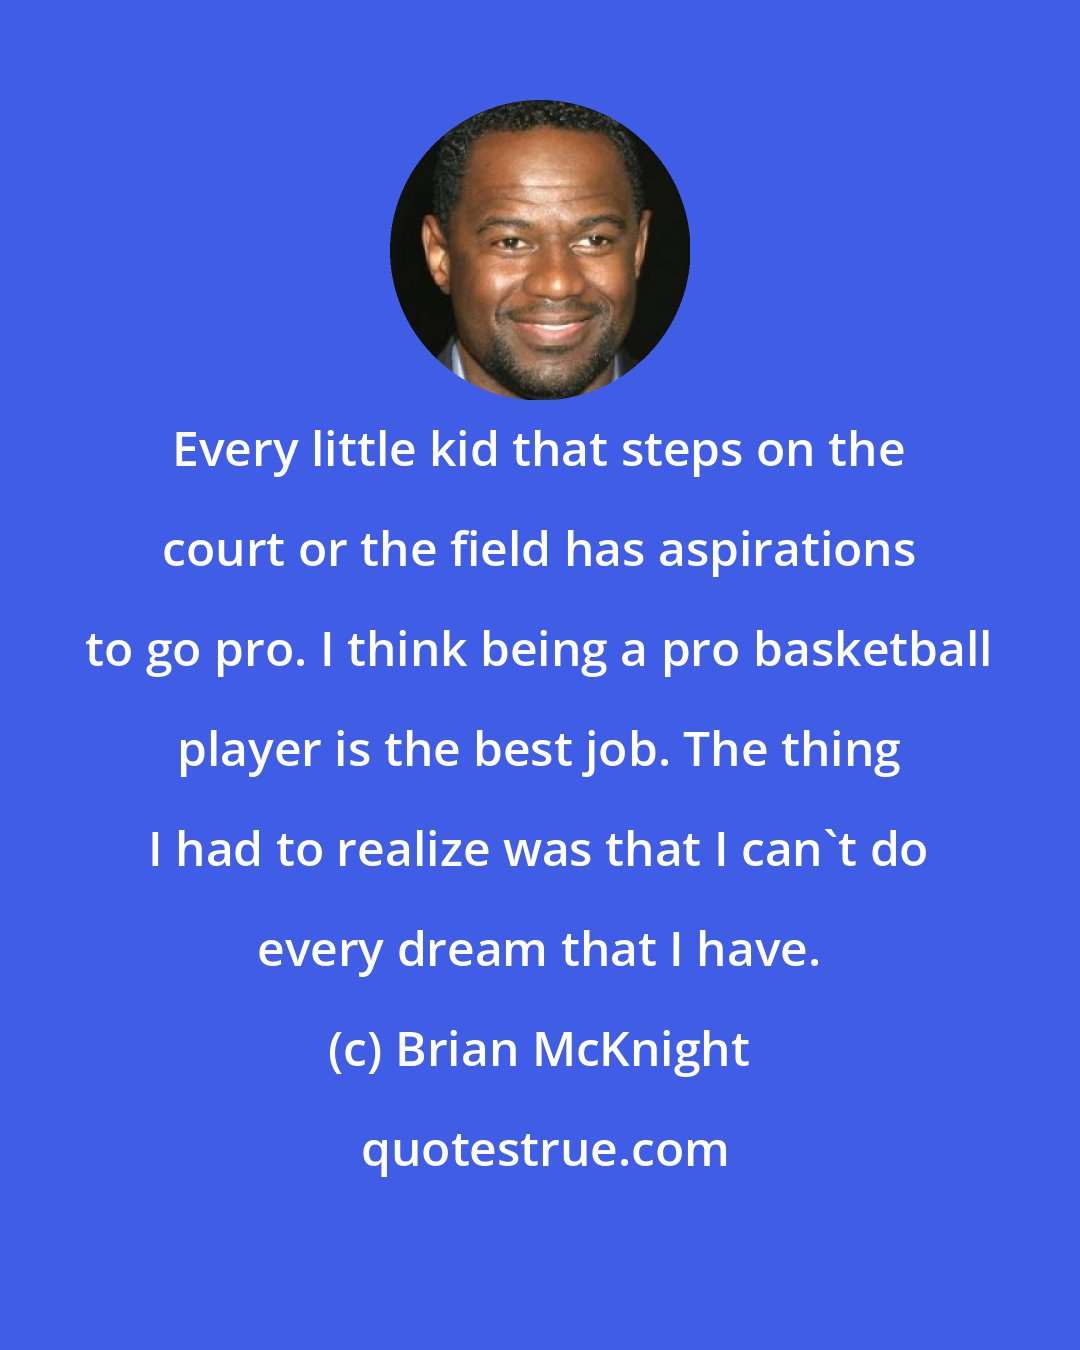 Brian McKnight: Every little kid that steps on the court or the field has aspirations to go pro. I think being a pro basketball player is the best job. The thing I had to realize was that I can't do every dream that I have.